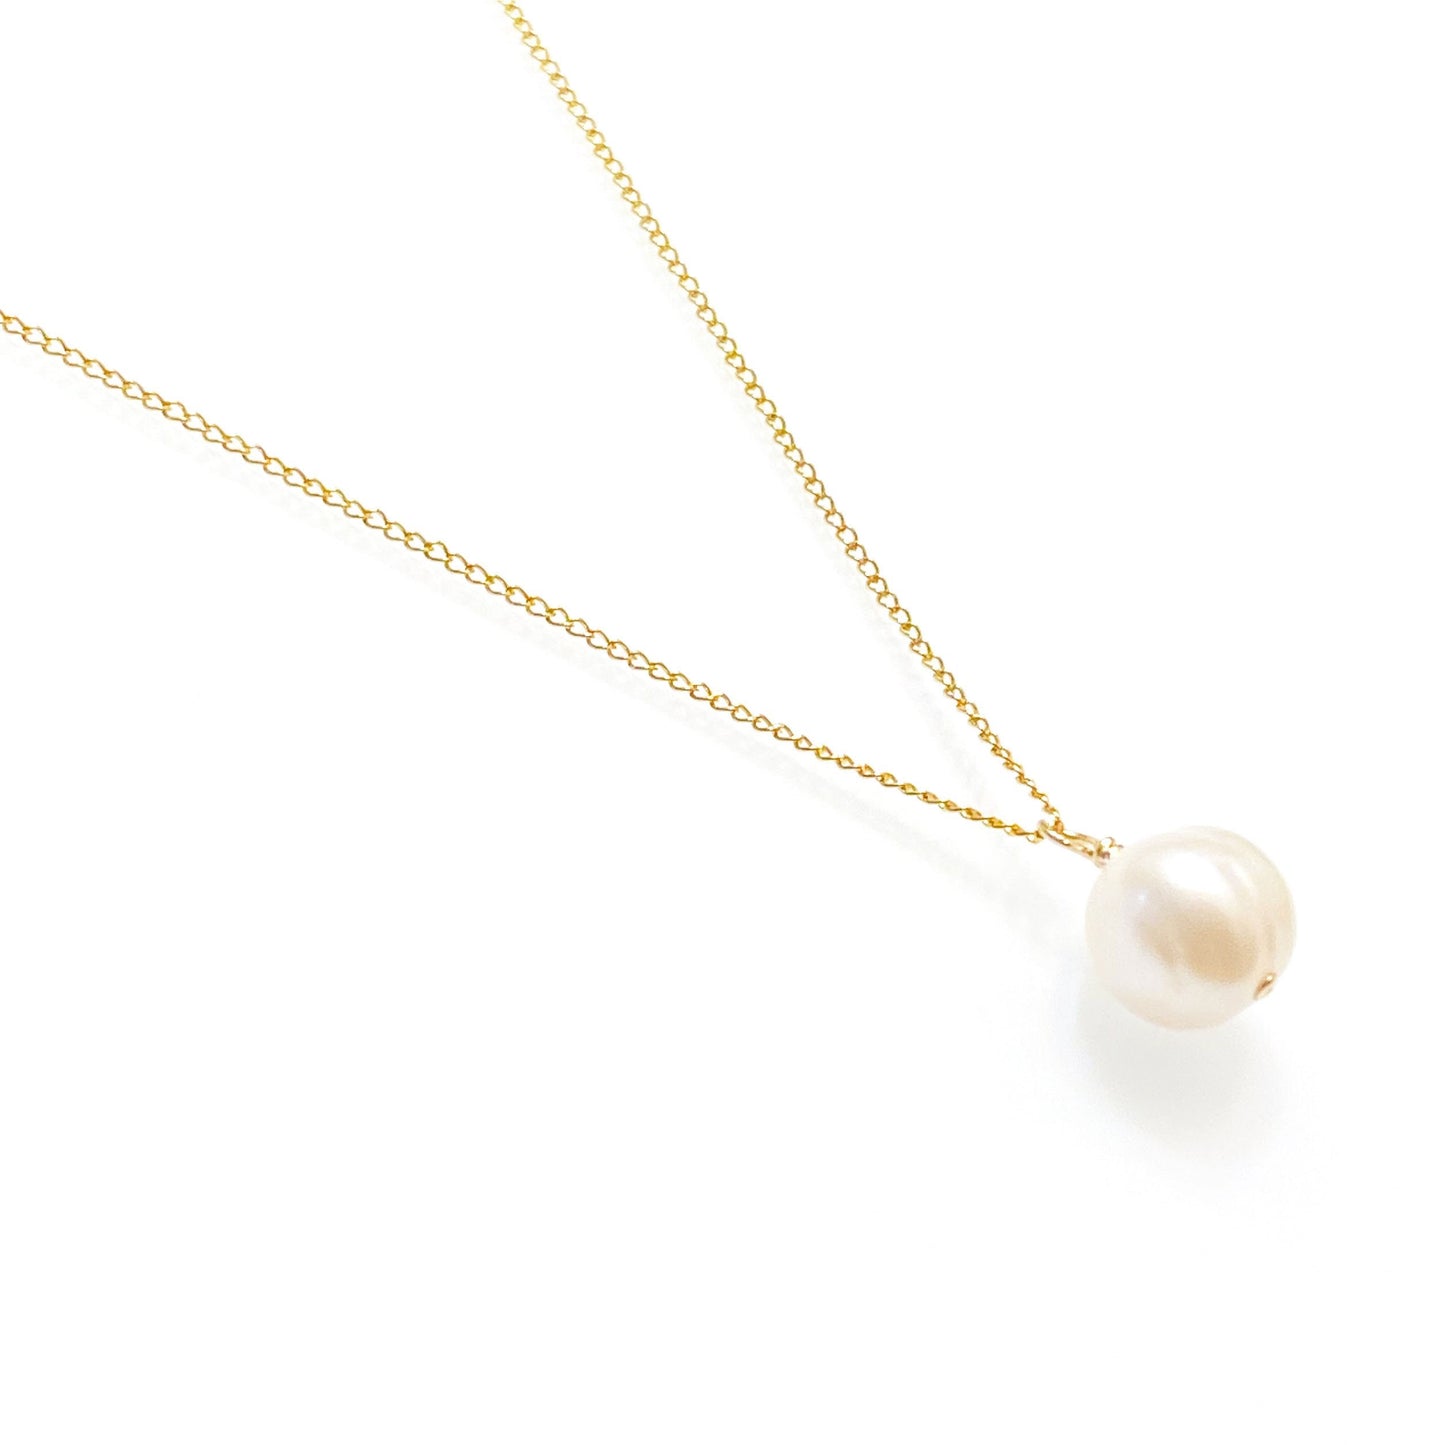 Minimalist pearl necklace (sterling silver and 14K gold-filled)